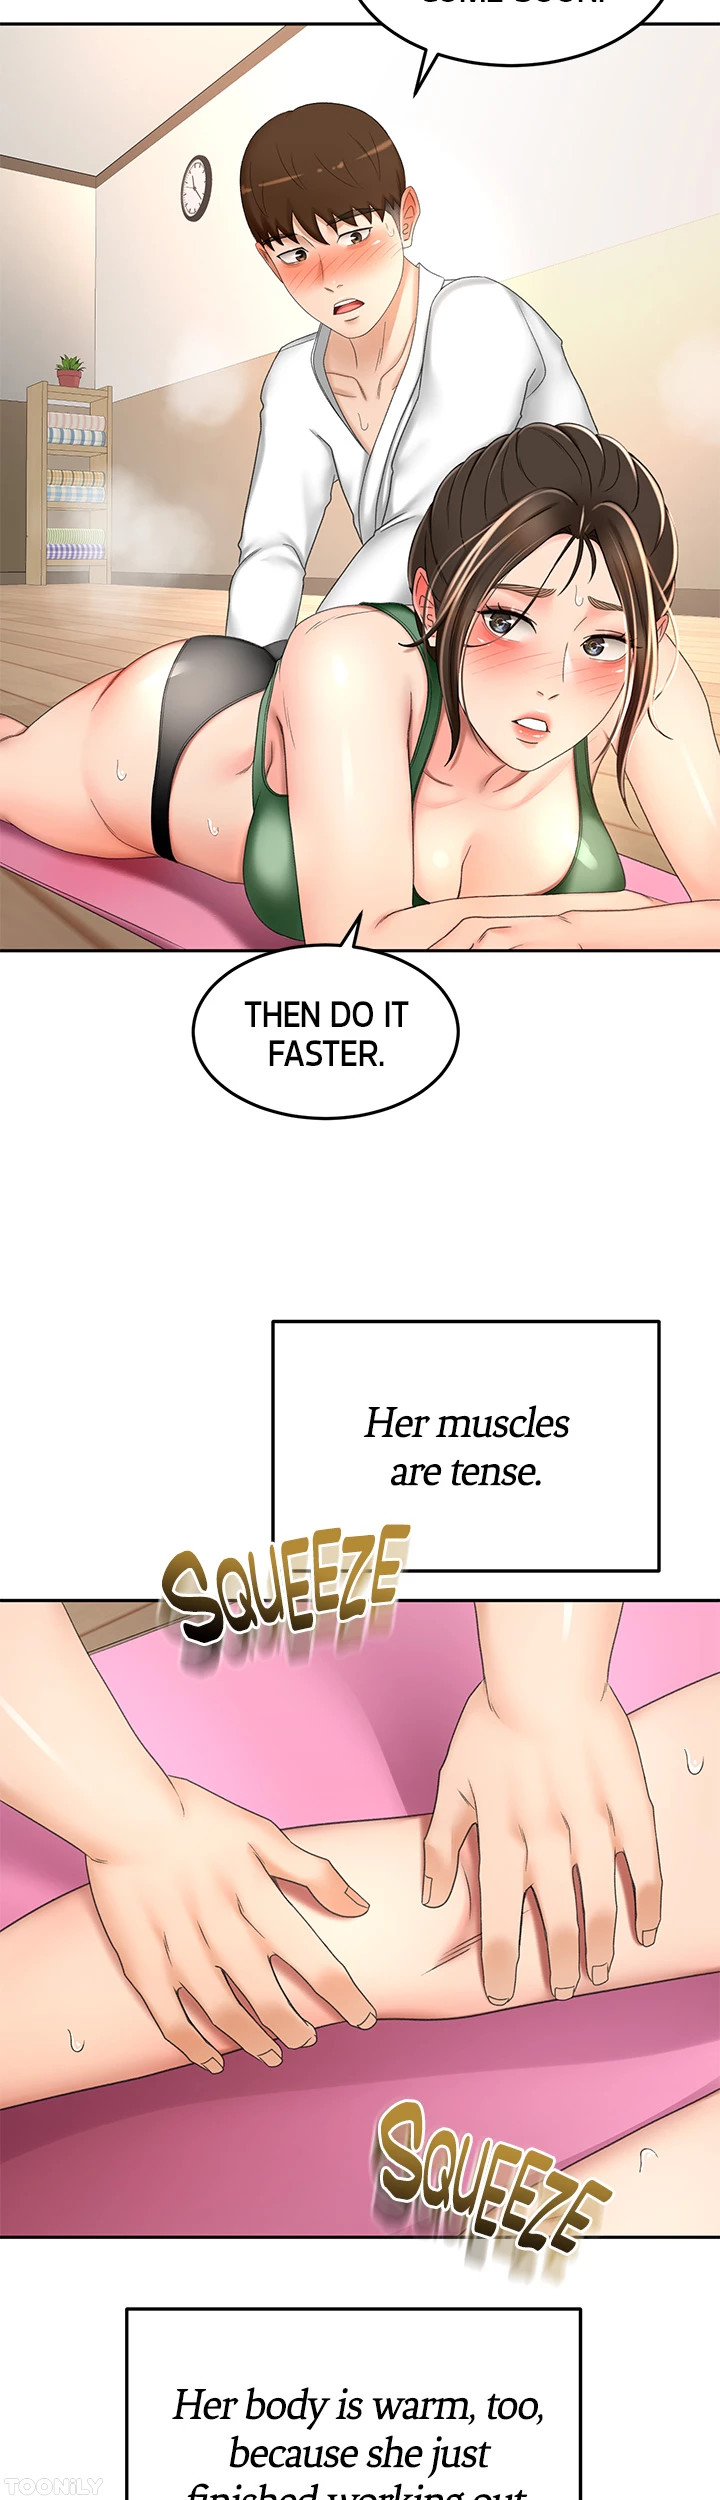 She is Working Out - Chapter 72 Page 13